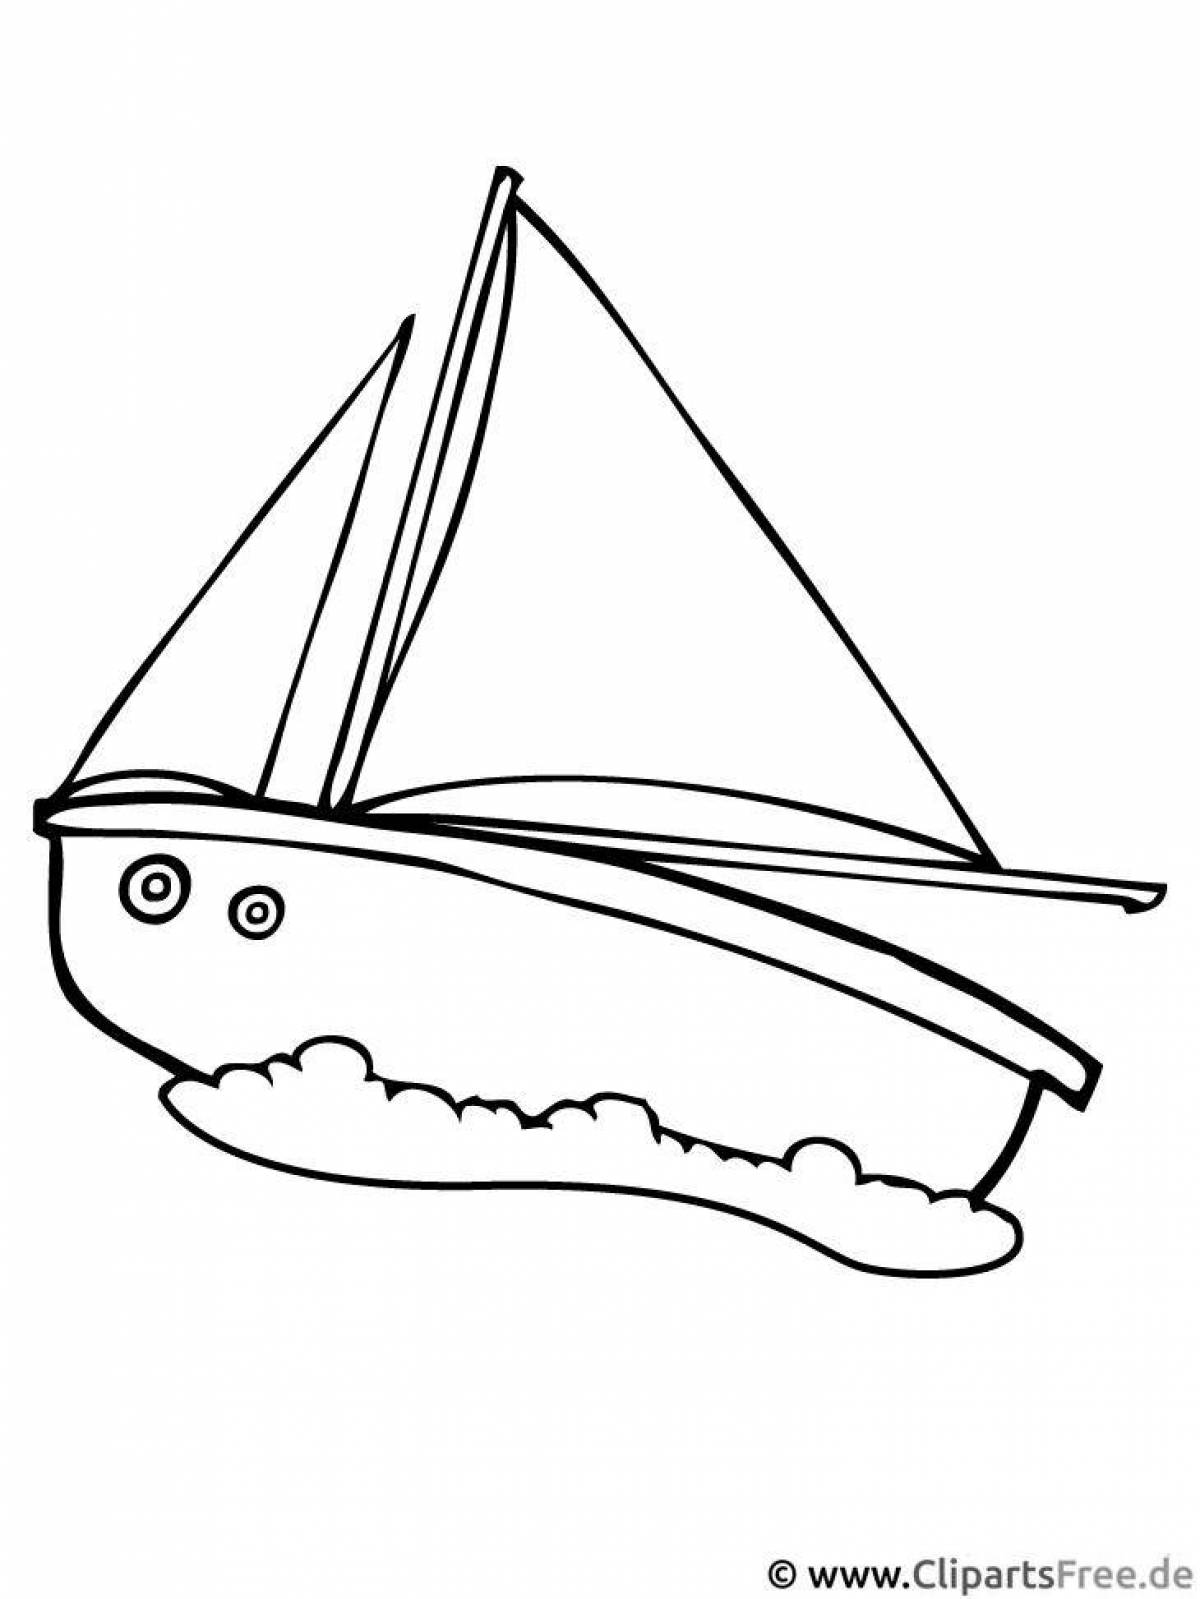 Luxury yacht coloring page